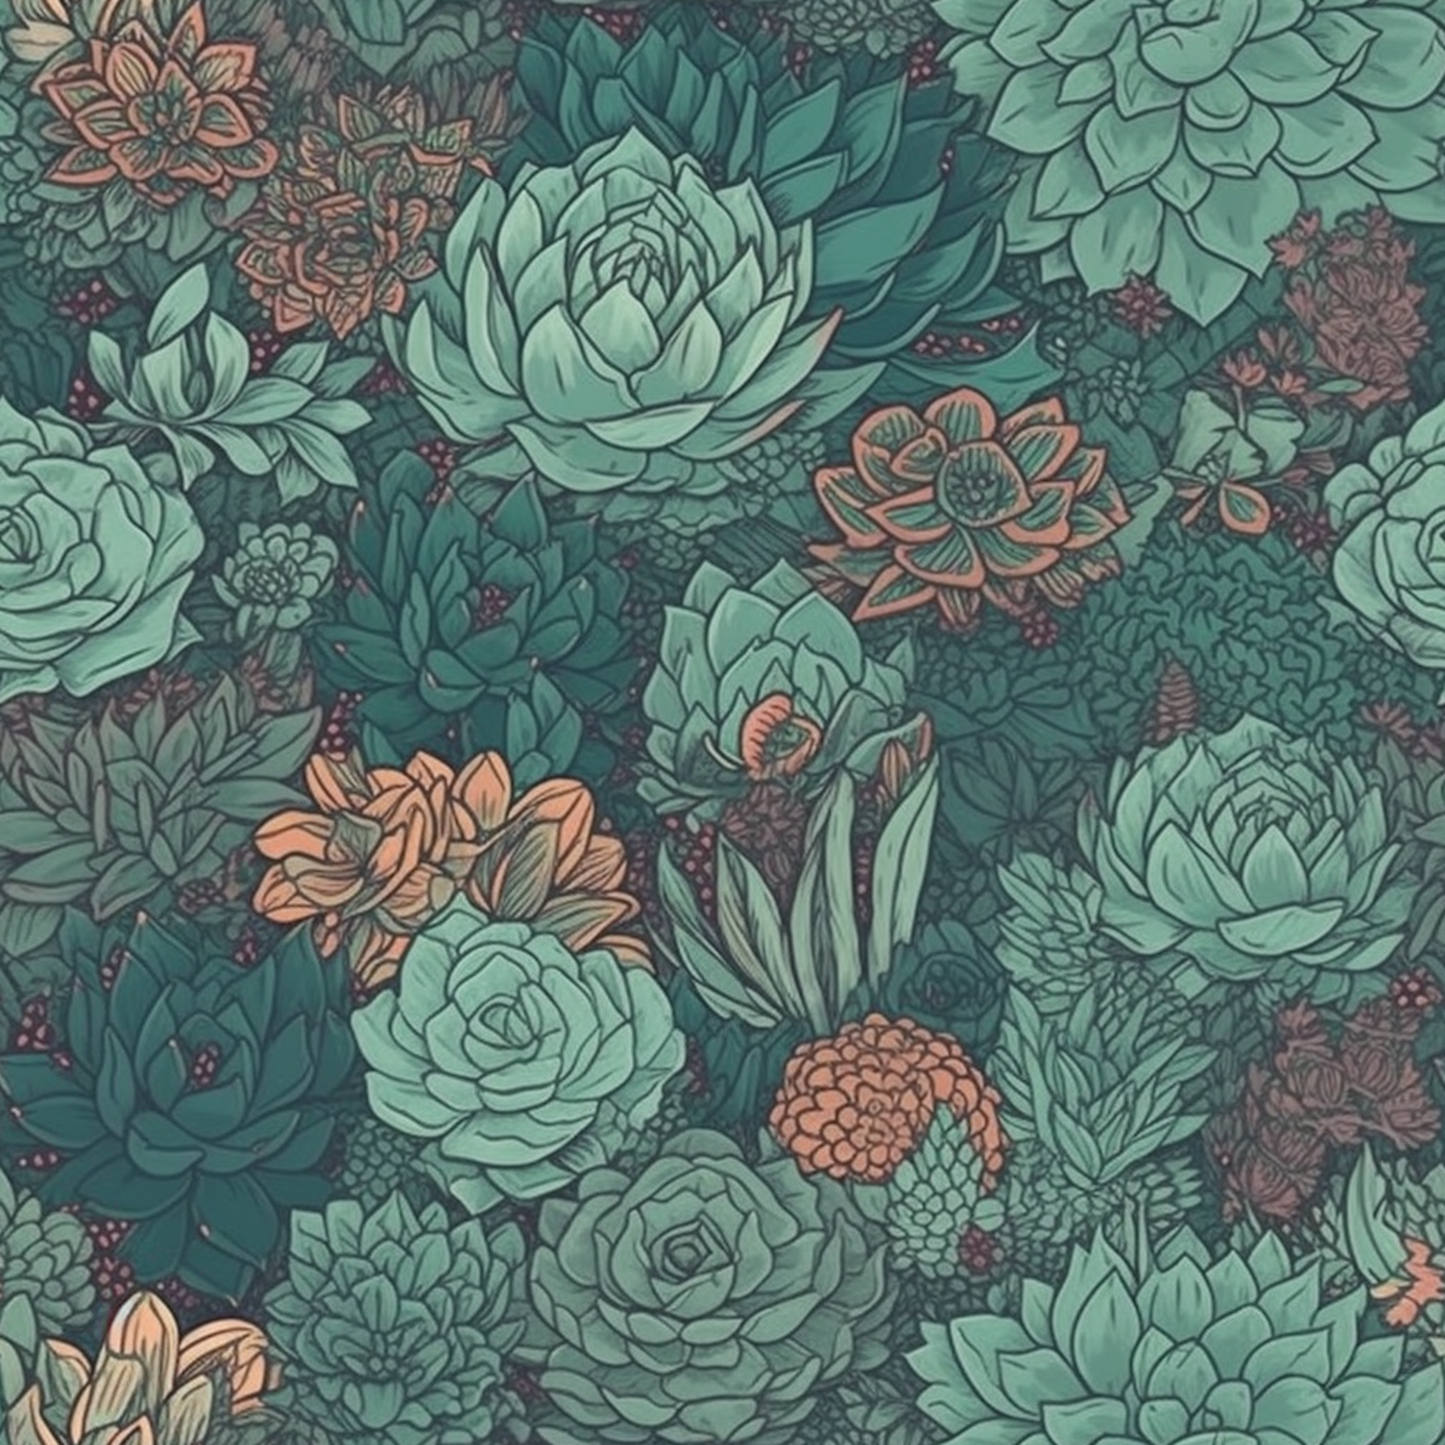 PINK AND BLUE SUCCULENTS